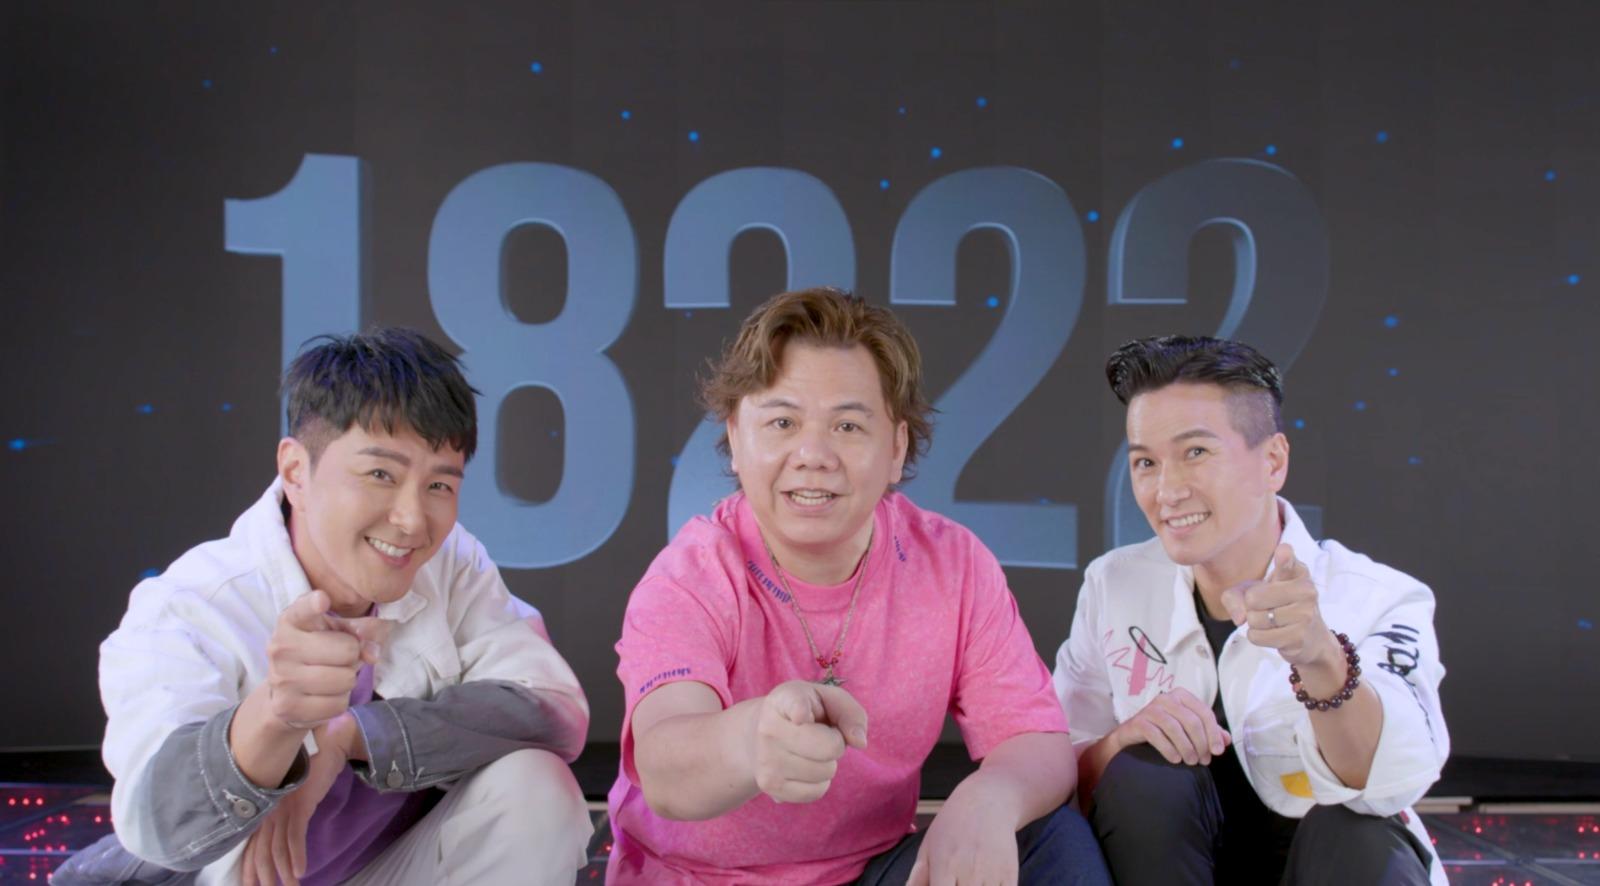 The promotional song “There’s no free lunch” for the campaign is performed by the band “HEA”, comprising (from left) Edwin Siu, Harry Ng and Albert Au.